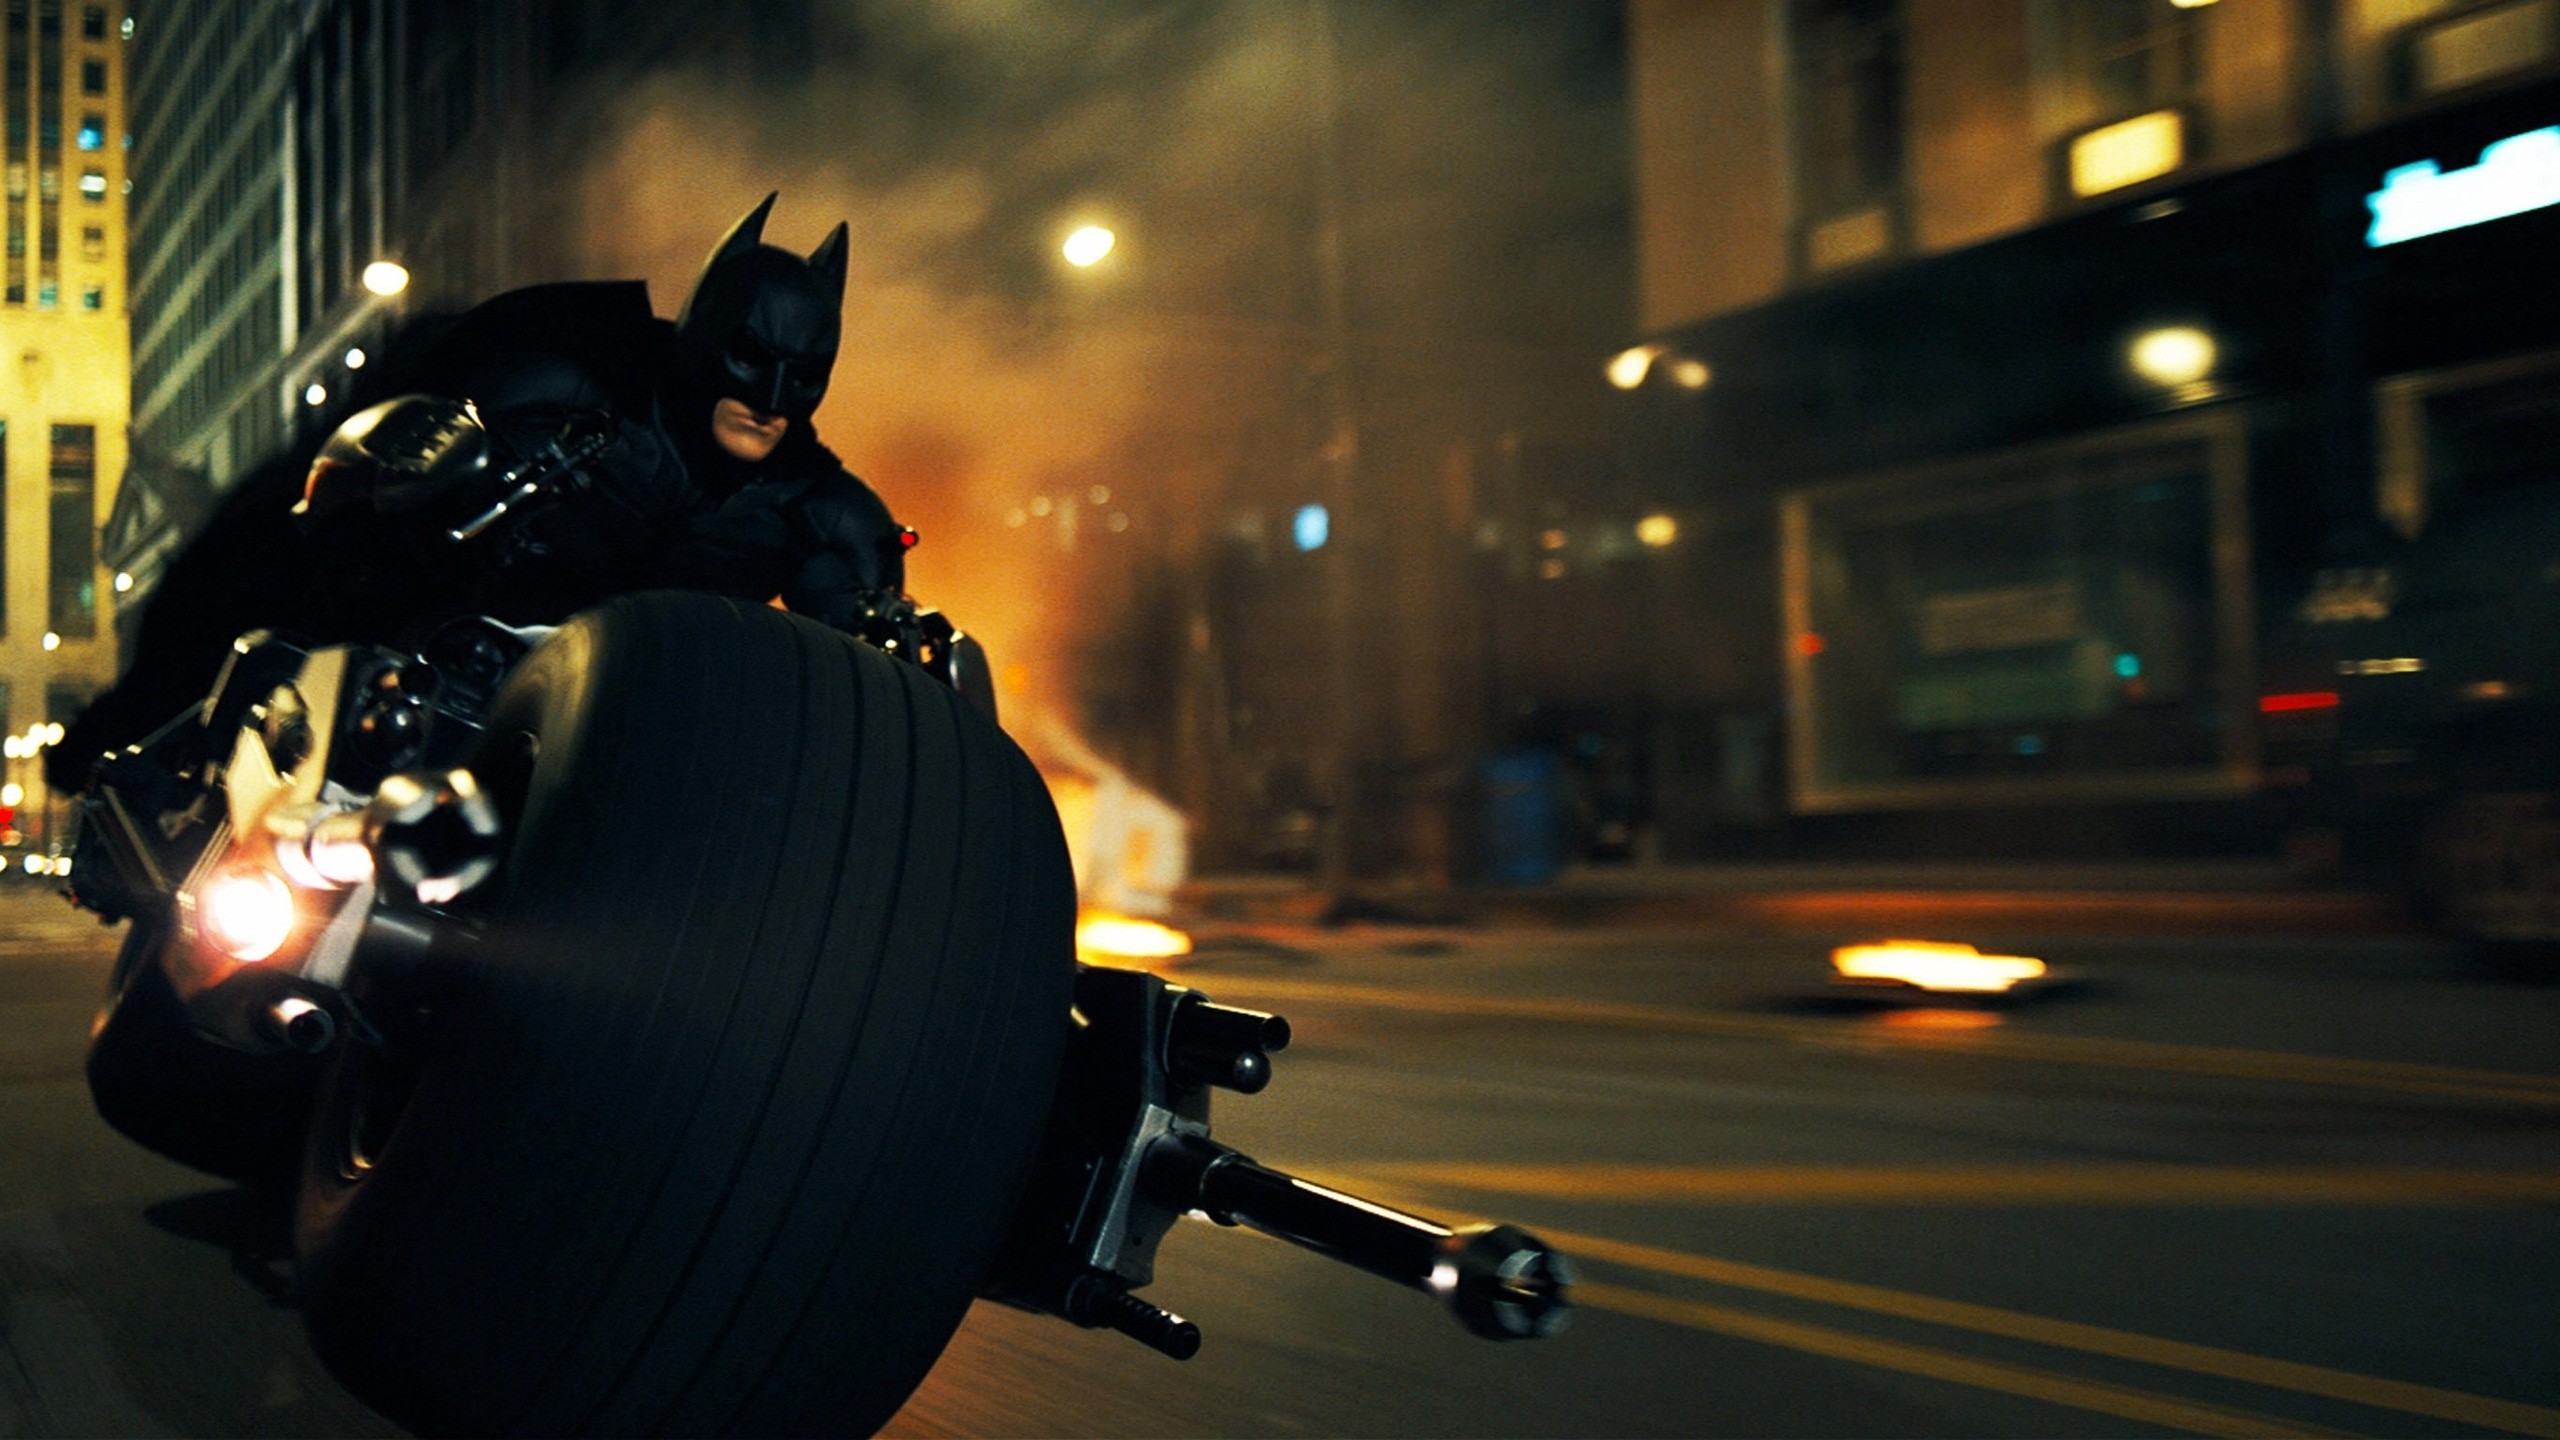 Batman, The Dark Knight Wallpapers HD / Desktop and Mobile Backgrounds